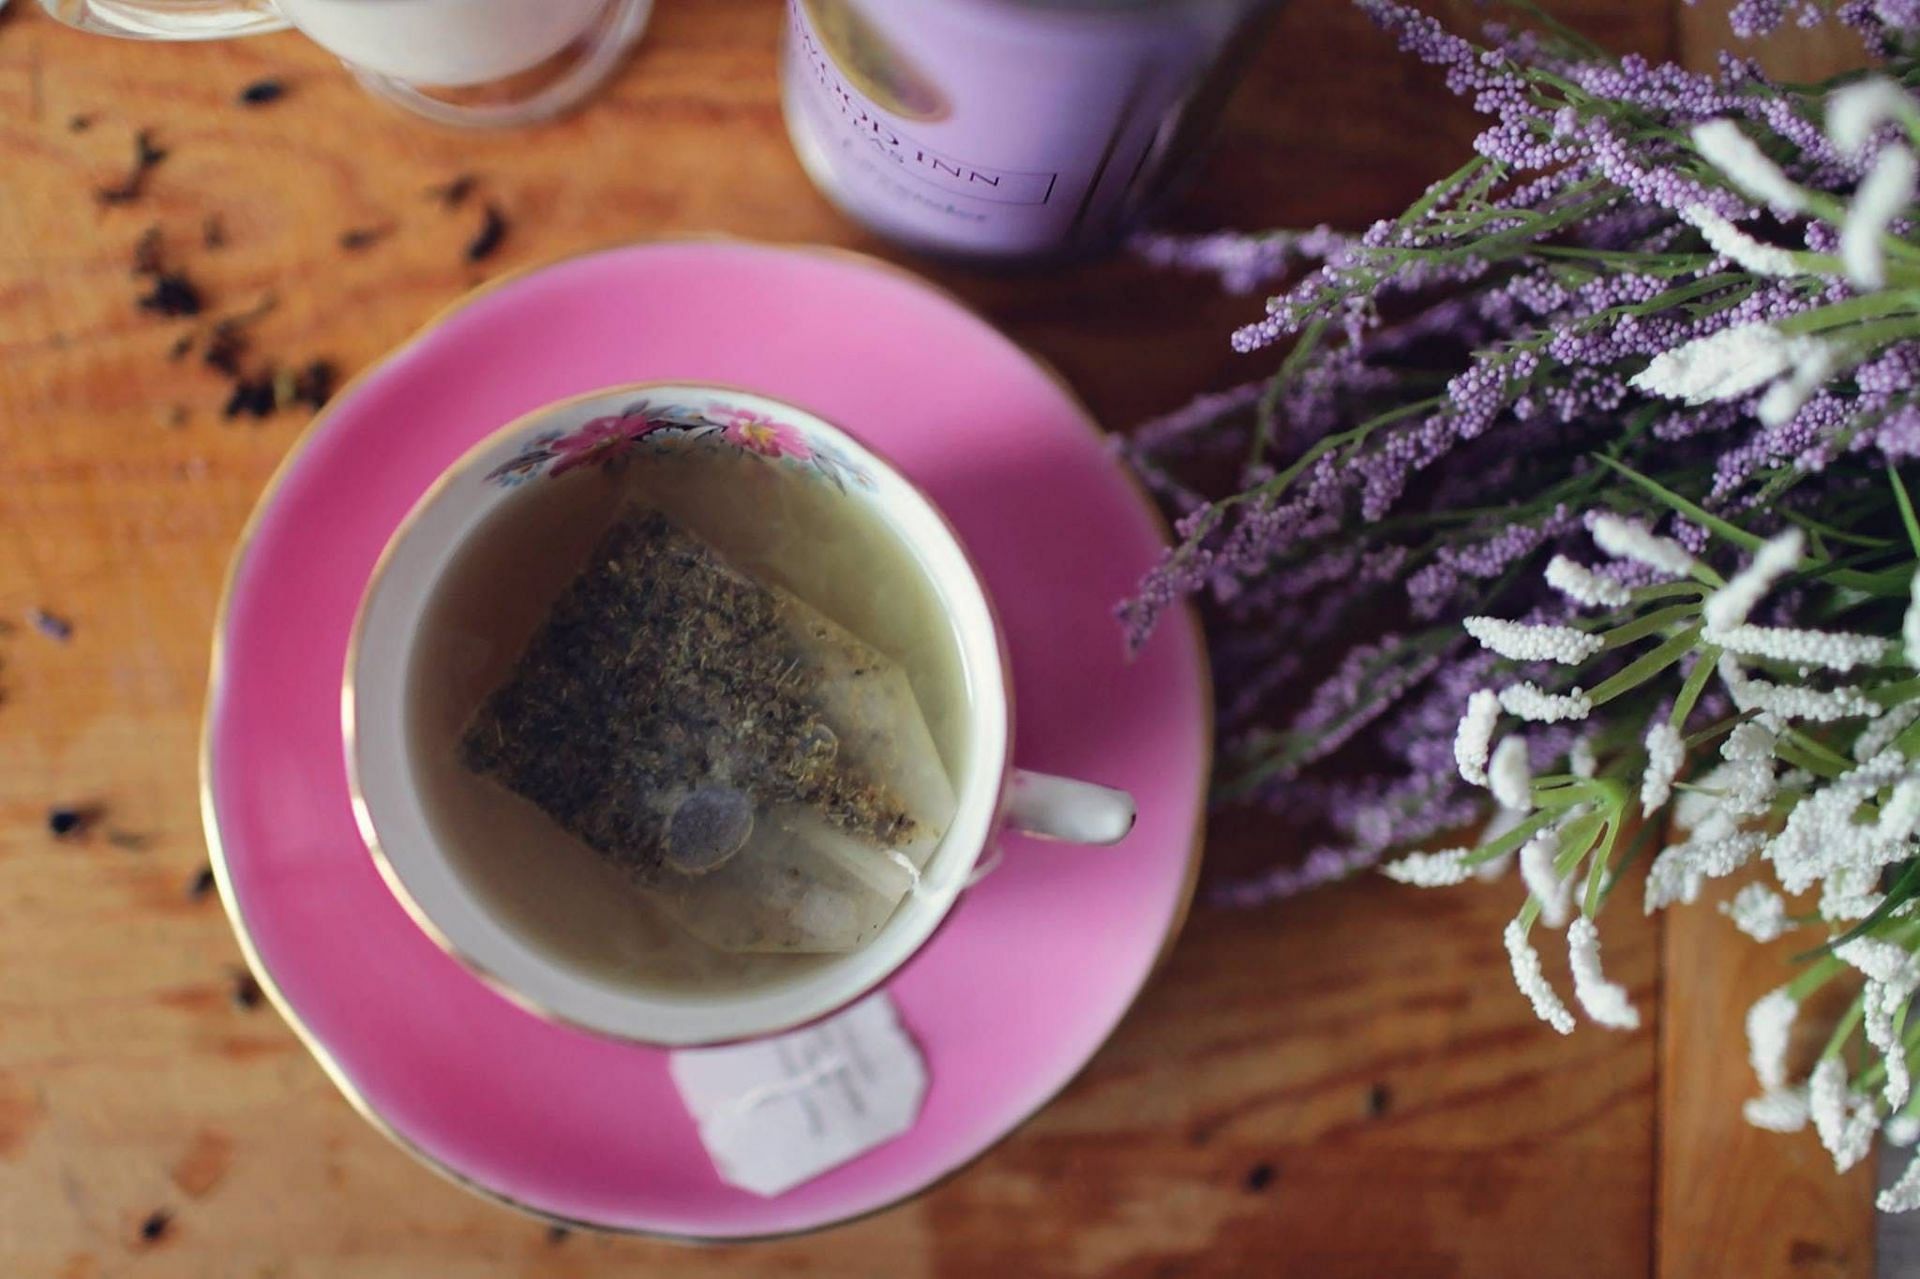 Lavender tea as one of the stress-relief teas (image sourced via Pexels / Photo by Leah)